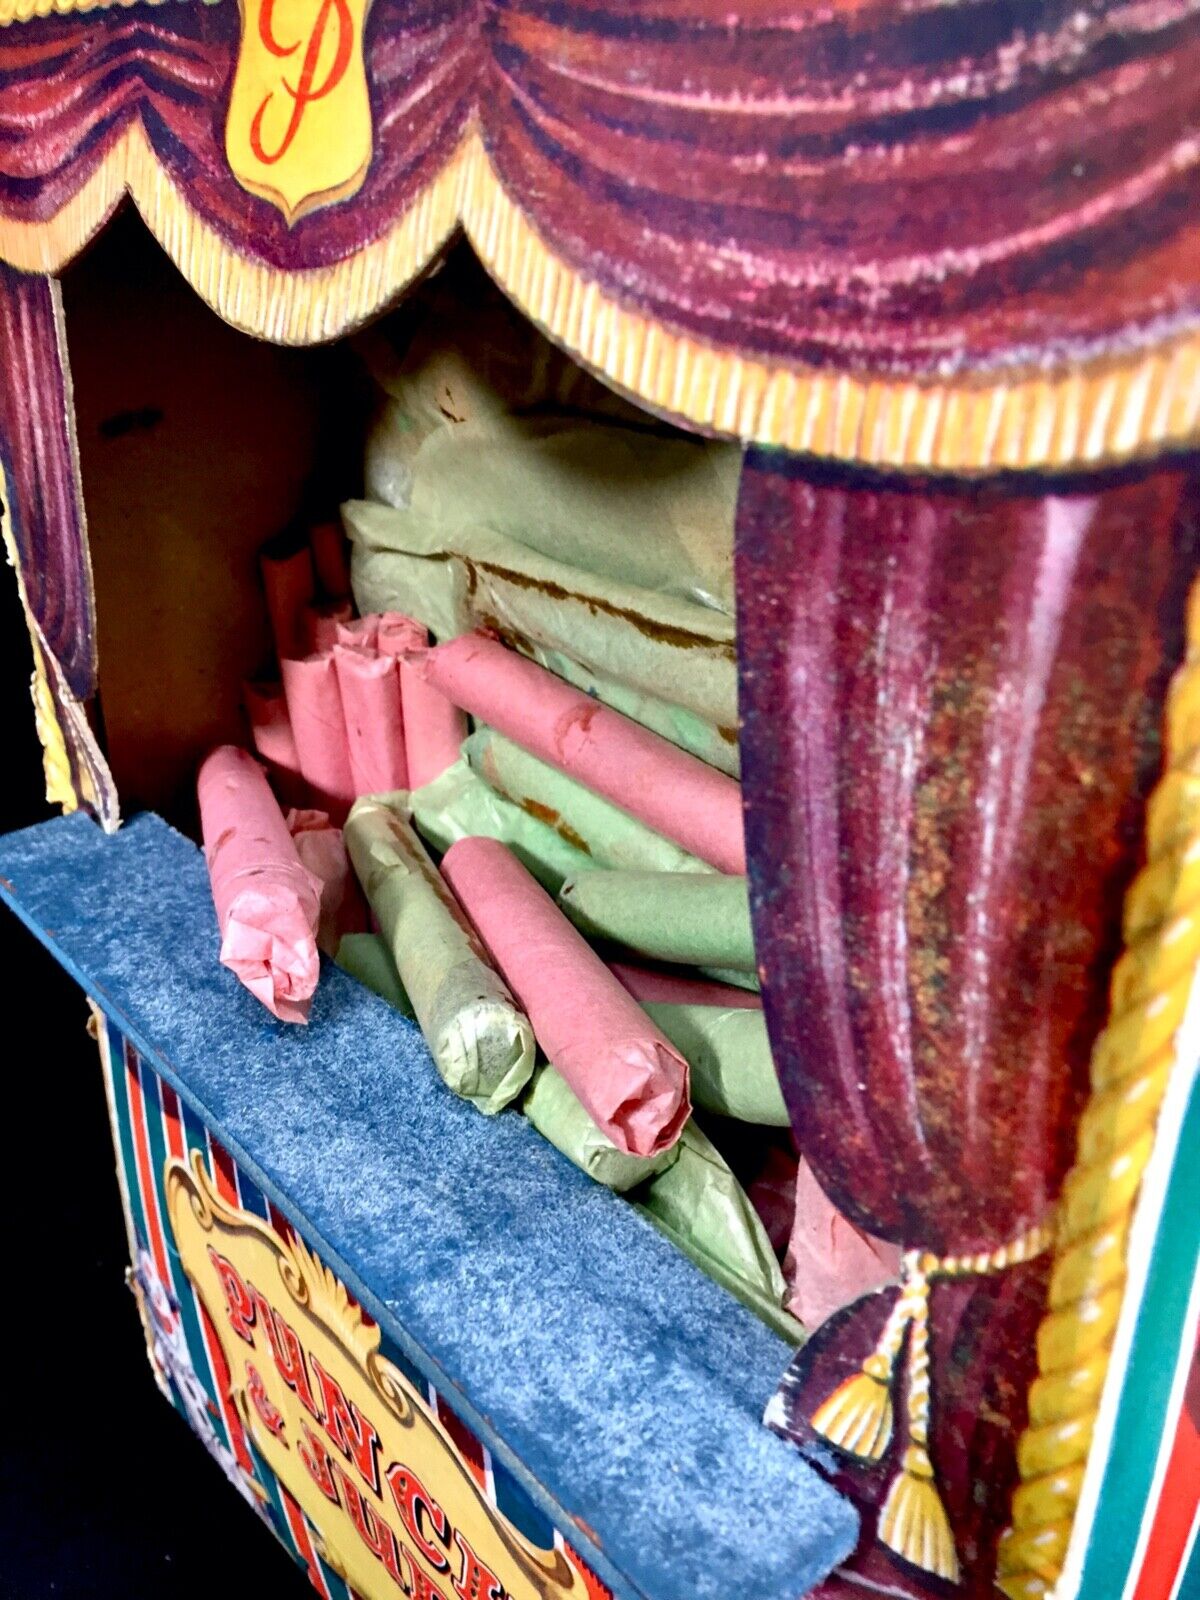 Antique RARE Punch and Judy Miniature Theatre / Play Books / Toys / c.1930